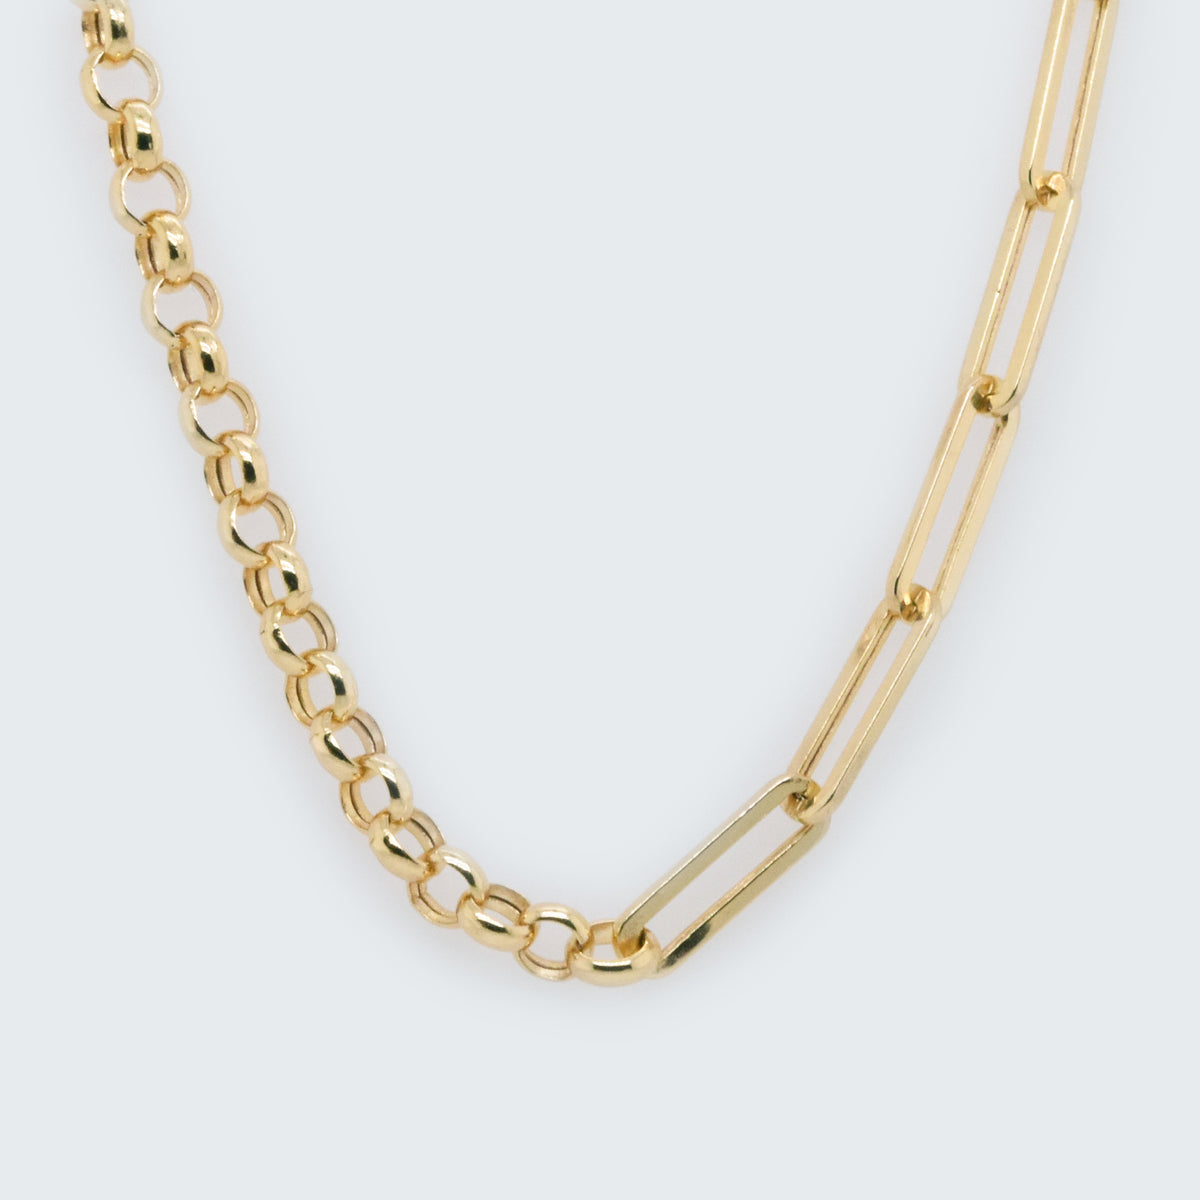 Carter necklace — Studio Collect